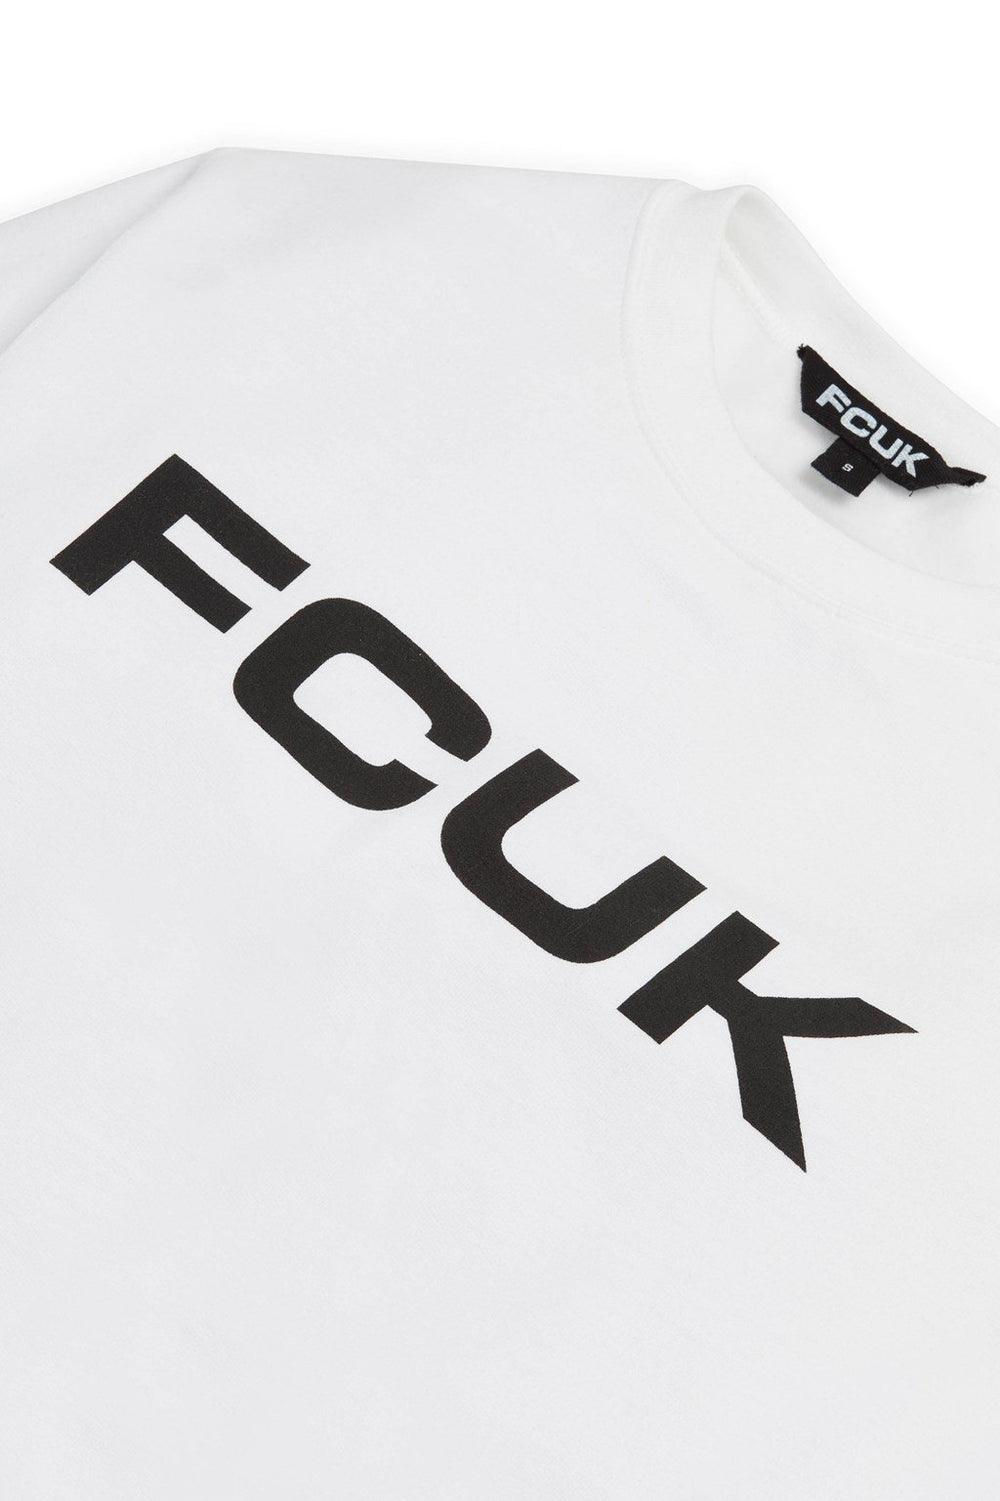 FCUK CREW NECK WHITE/BLACK | French Connection US